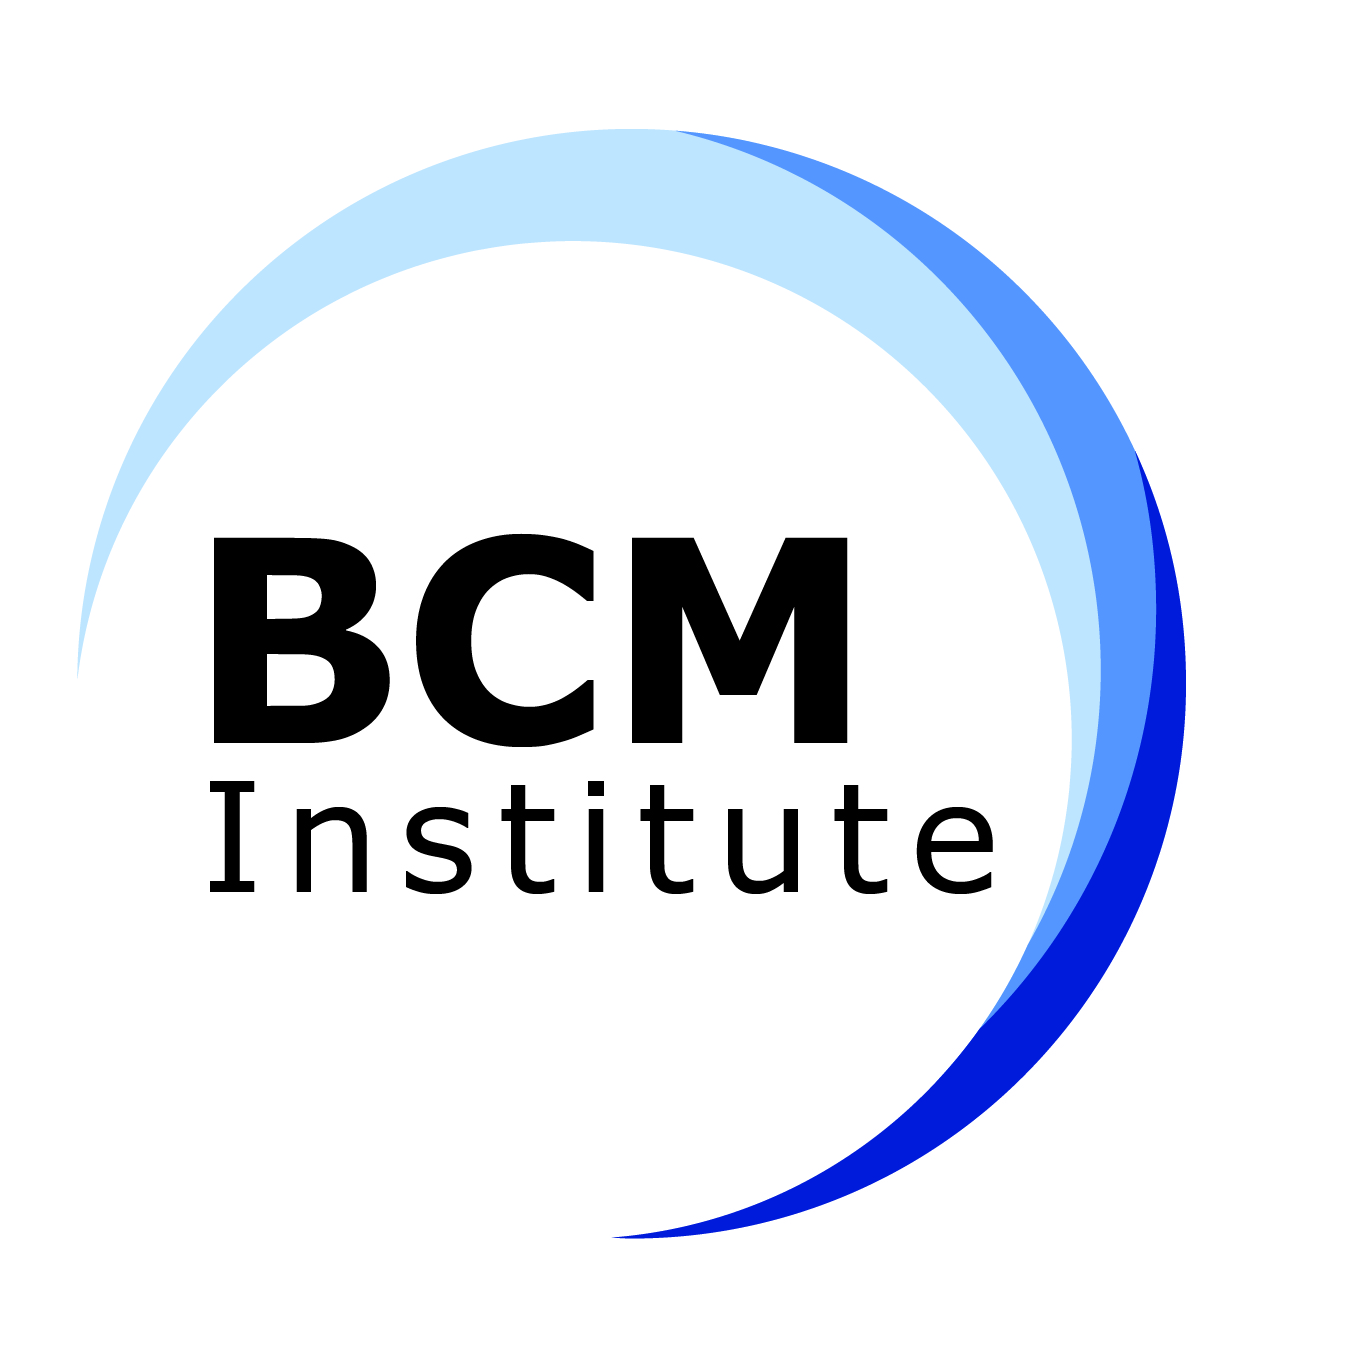 More about BCM Institute